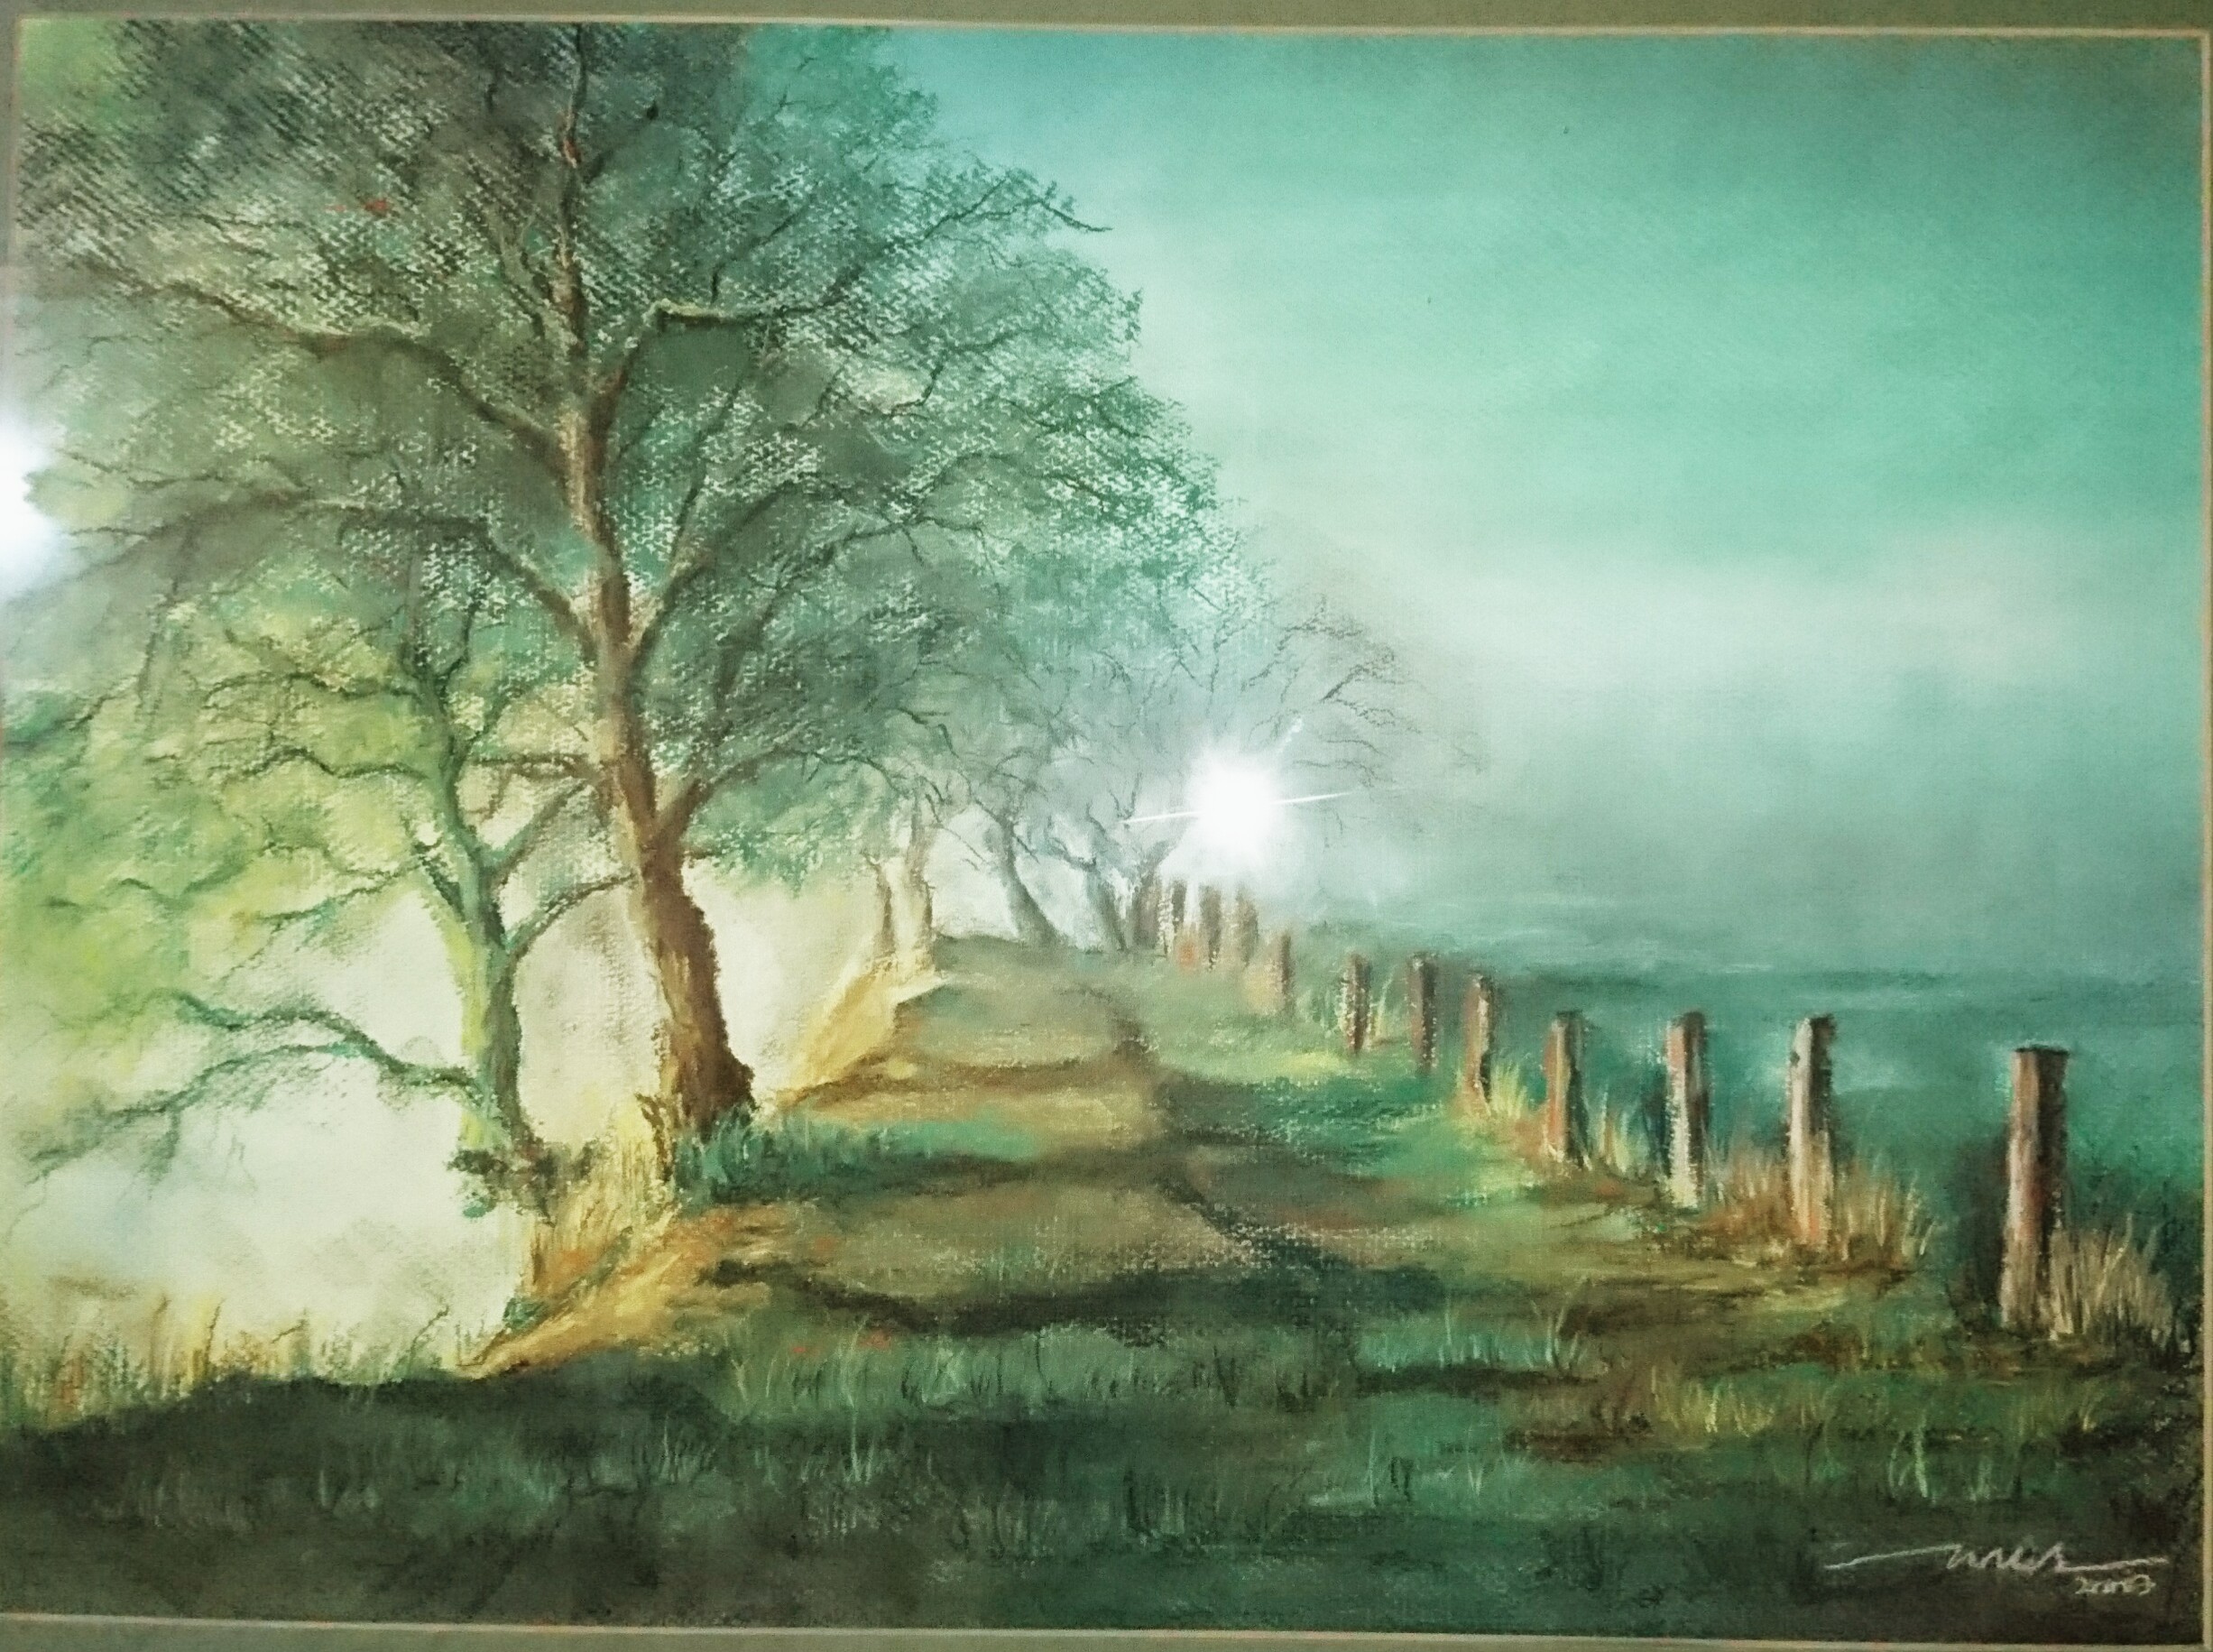 Landscape in Pastels by younas masood